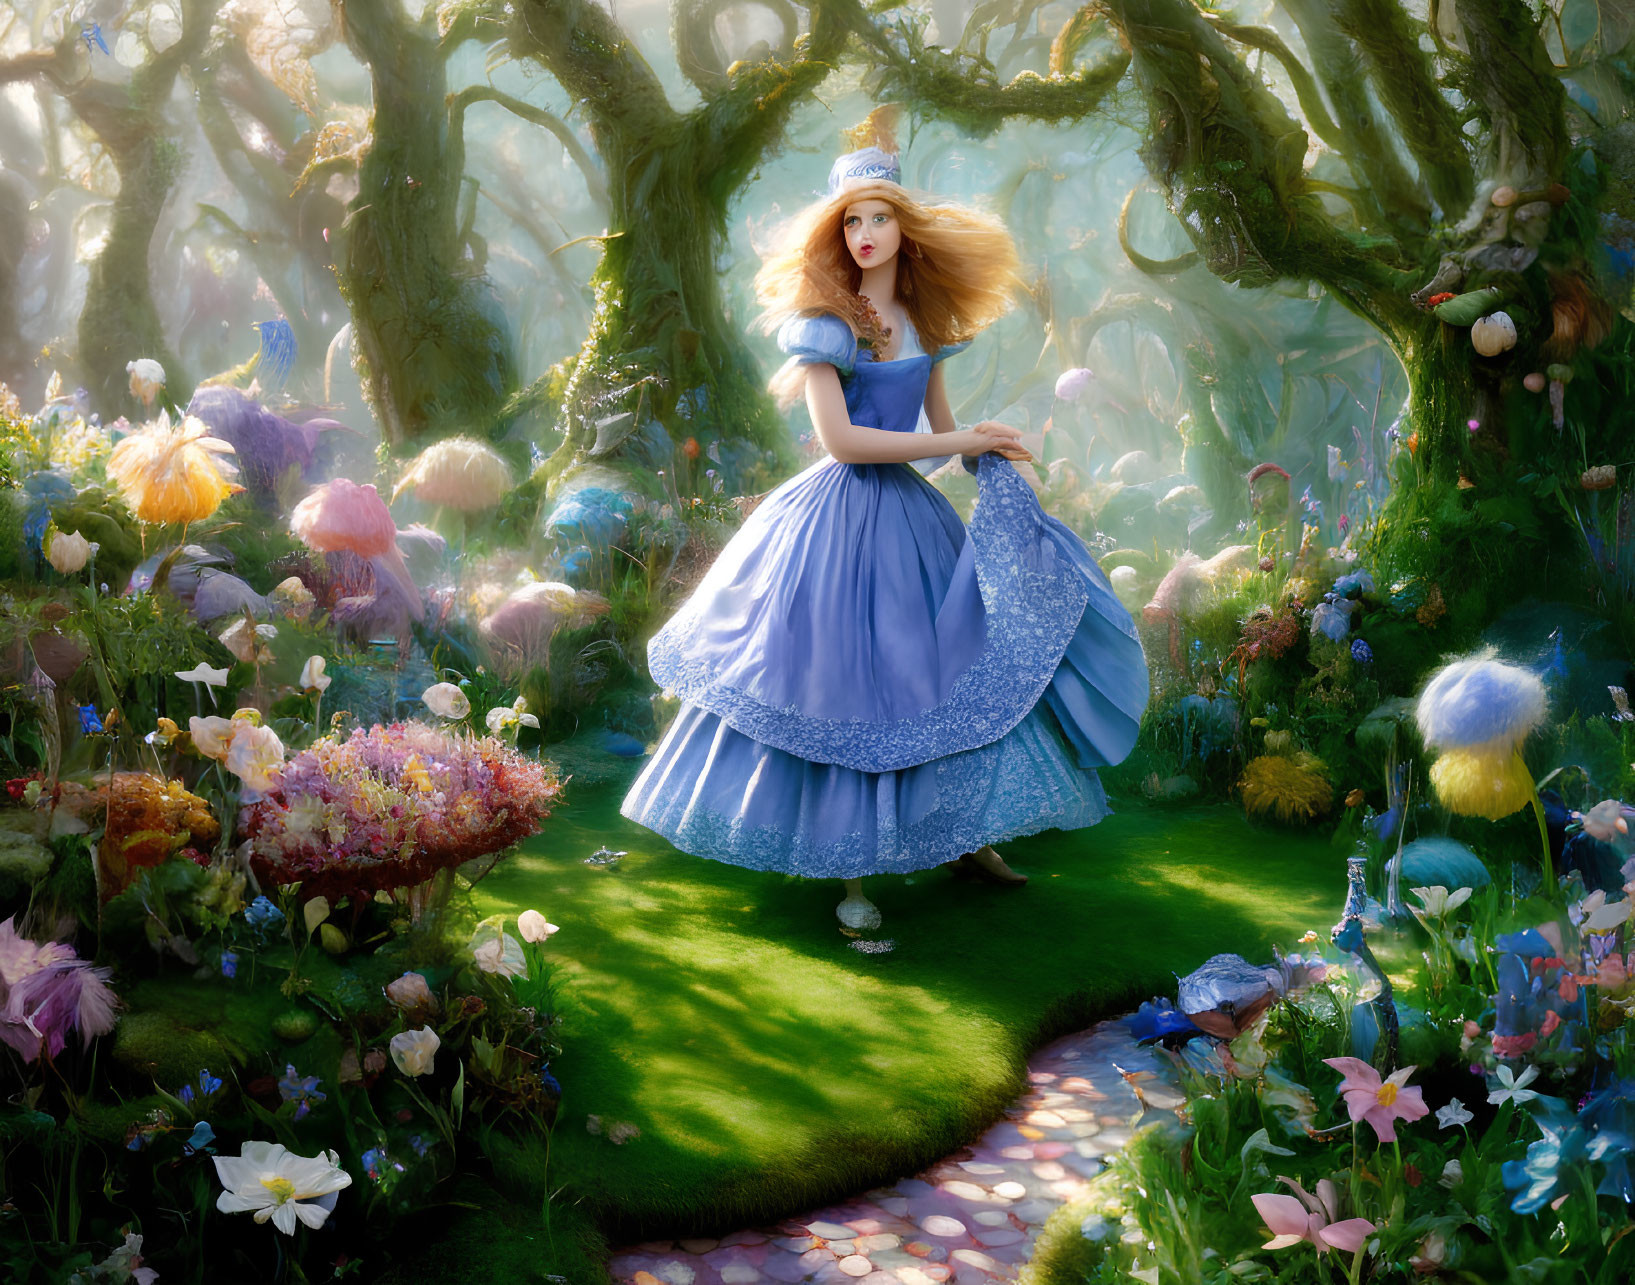 Woman in Alice in Wonderland costume in whimsical forest with colorful flowers and trees